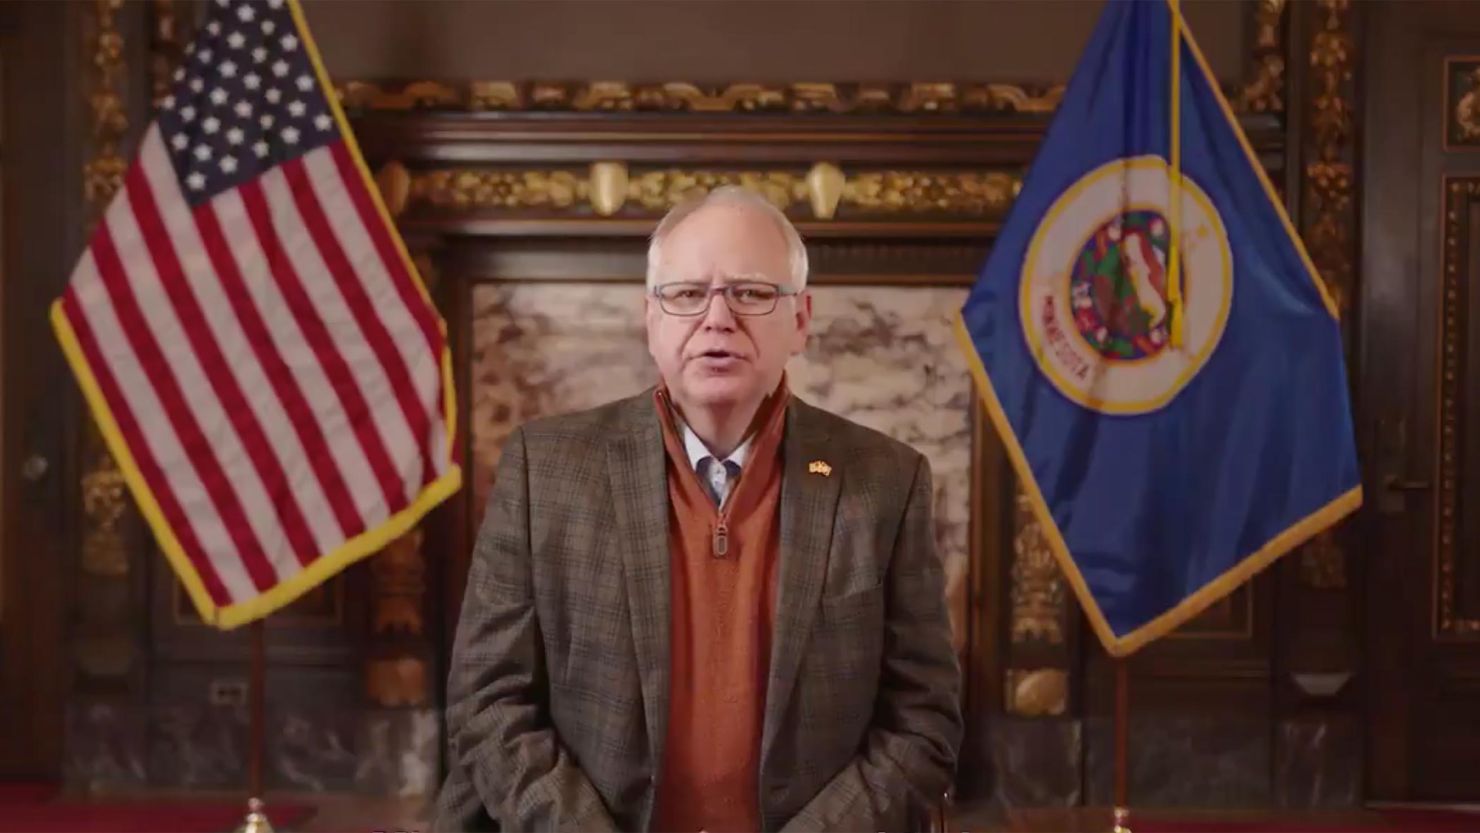 Minnesota Gov. Tim Walz appears in a video to encourage voting.